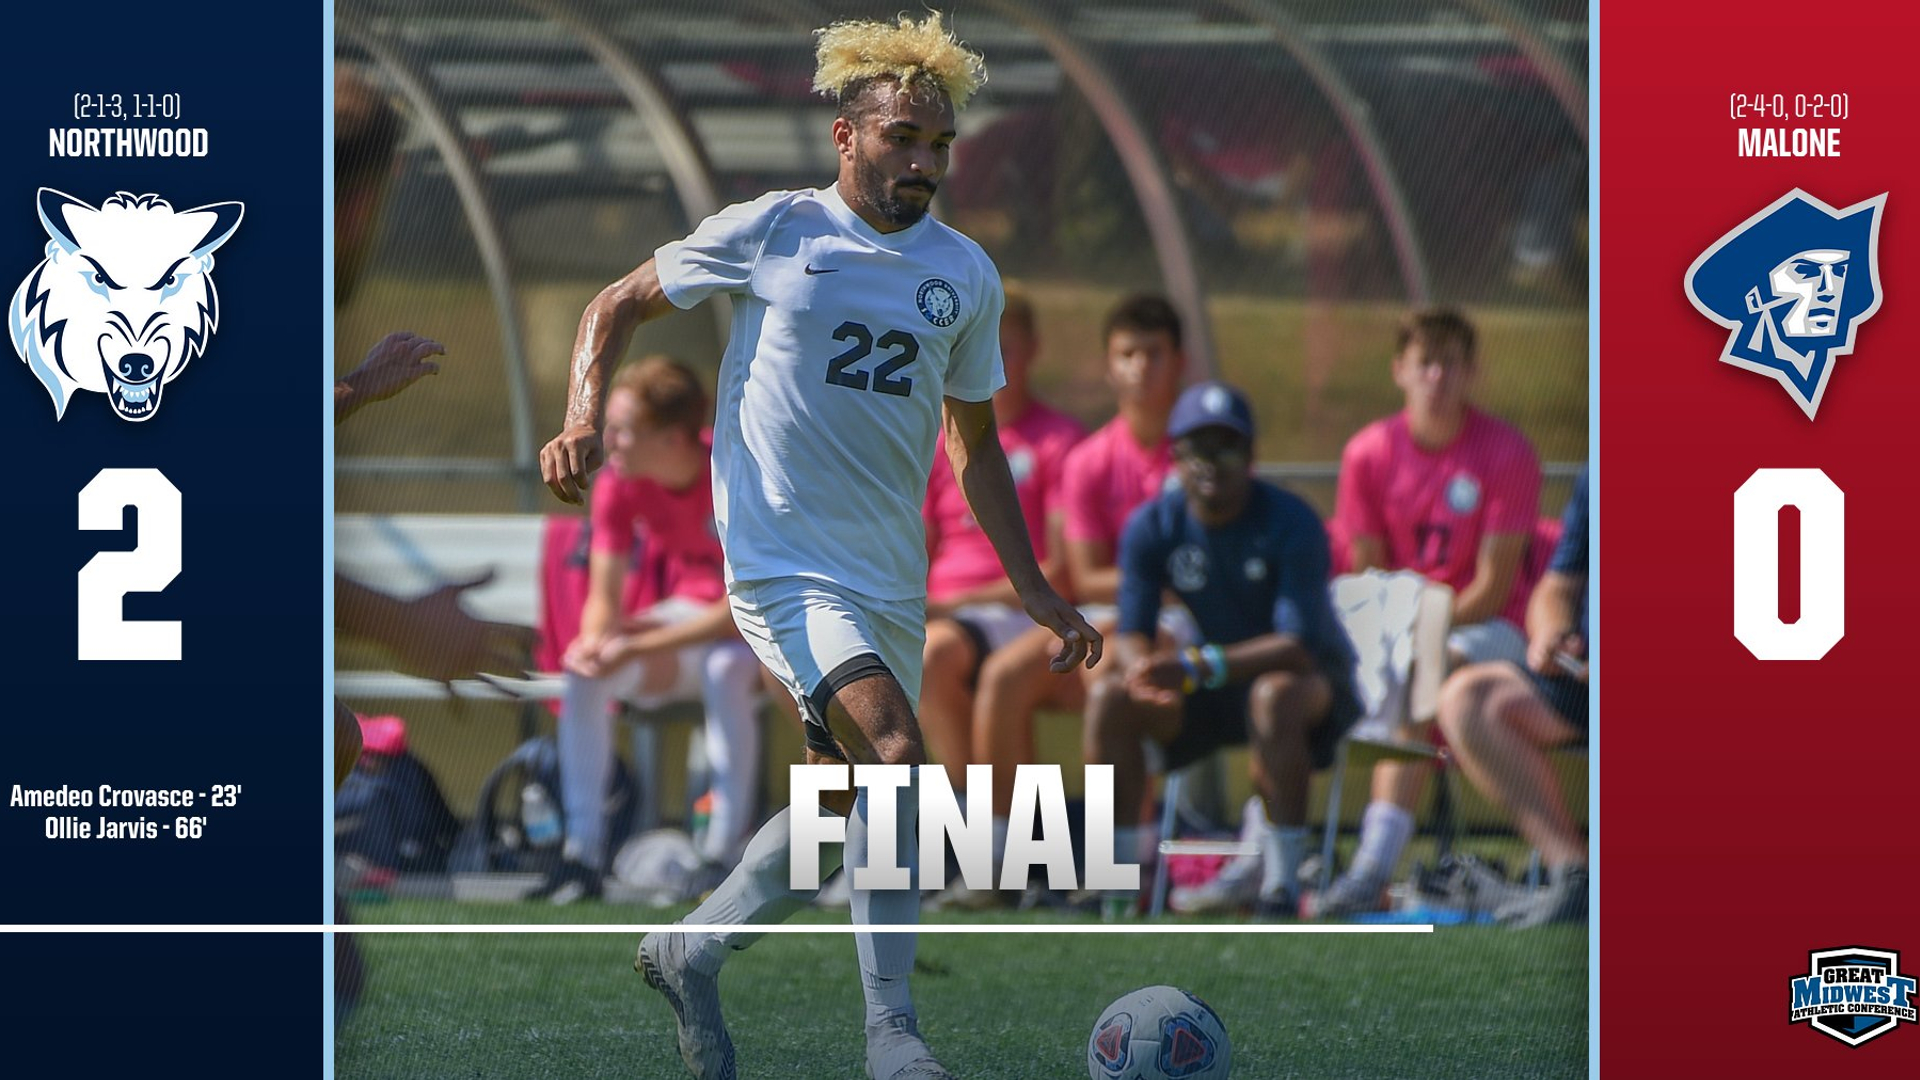 Crovasce And Co. Get First GMAC Win For Men's Soccer, 2-0 Versus Malone